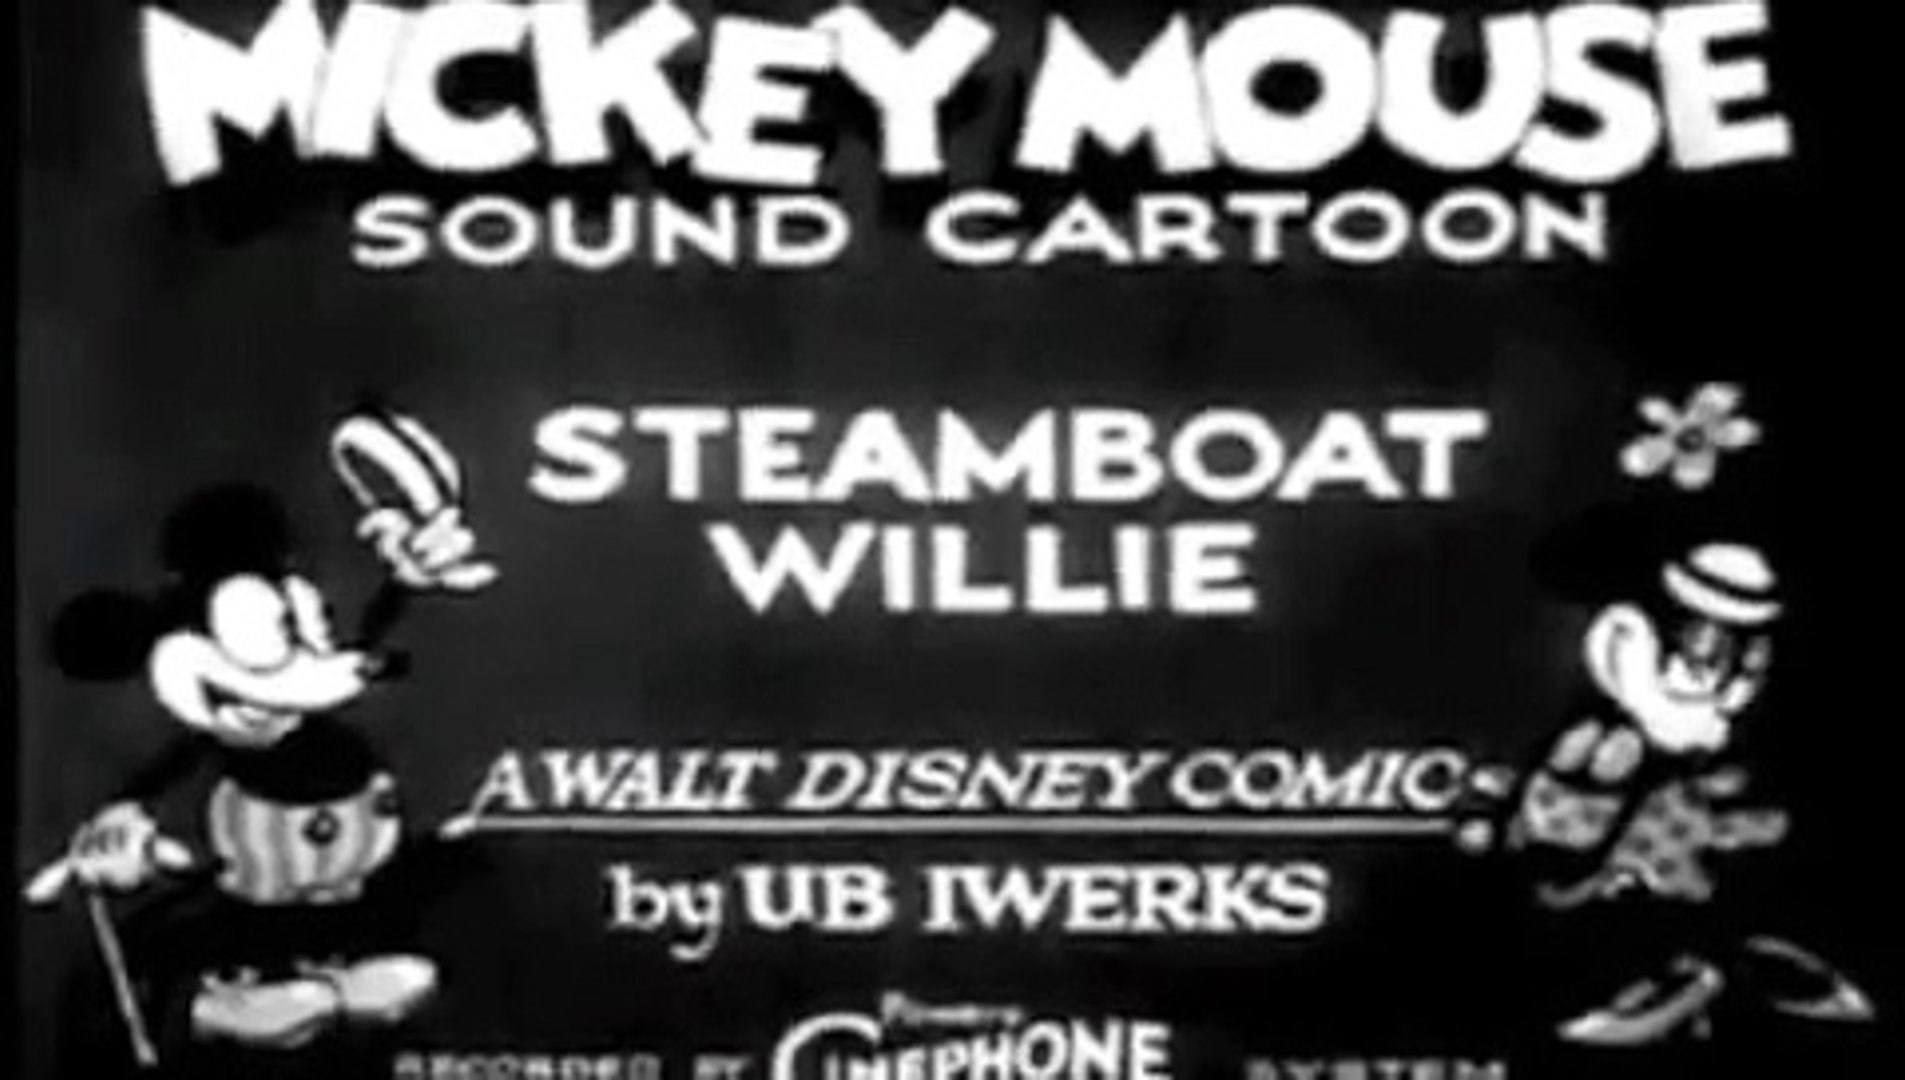 Steamboat Willie La Premiere Appartion De Mickey Mouse Video Dailymotion